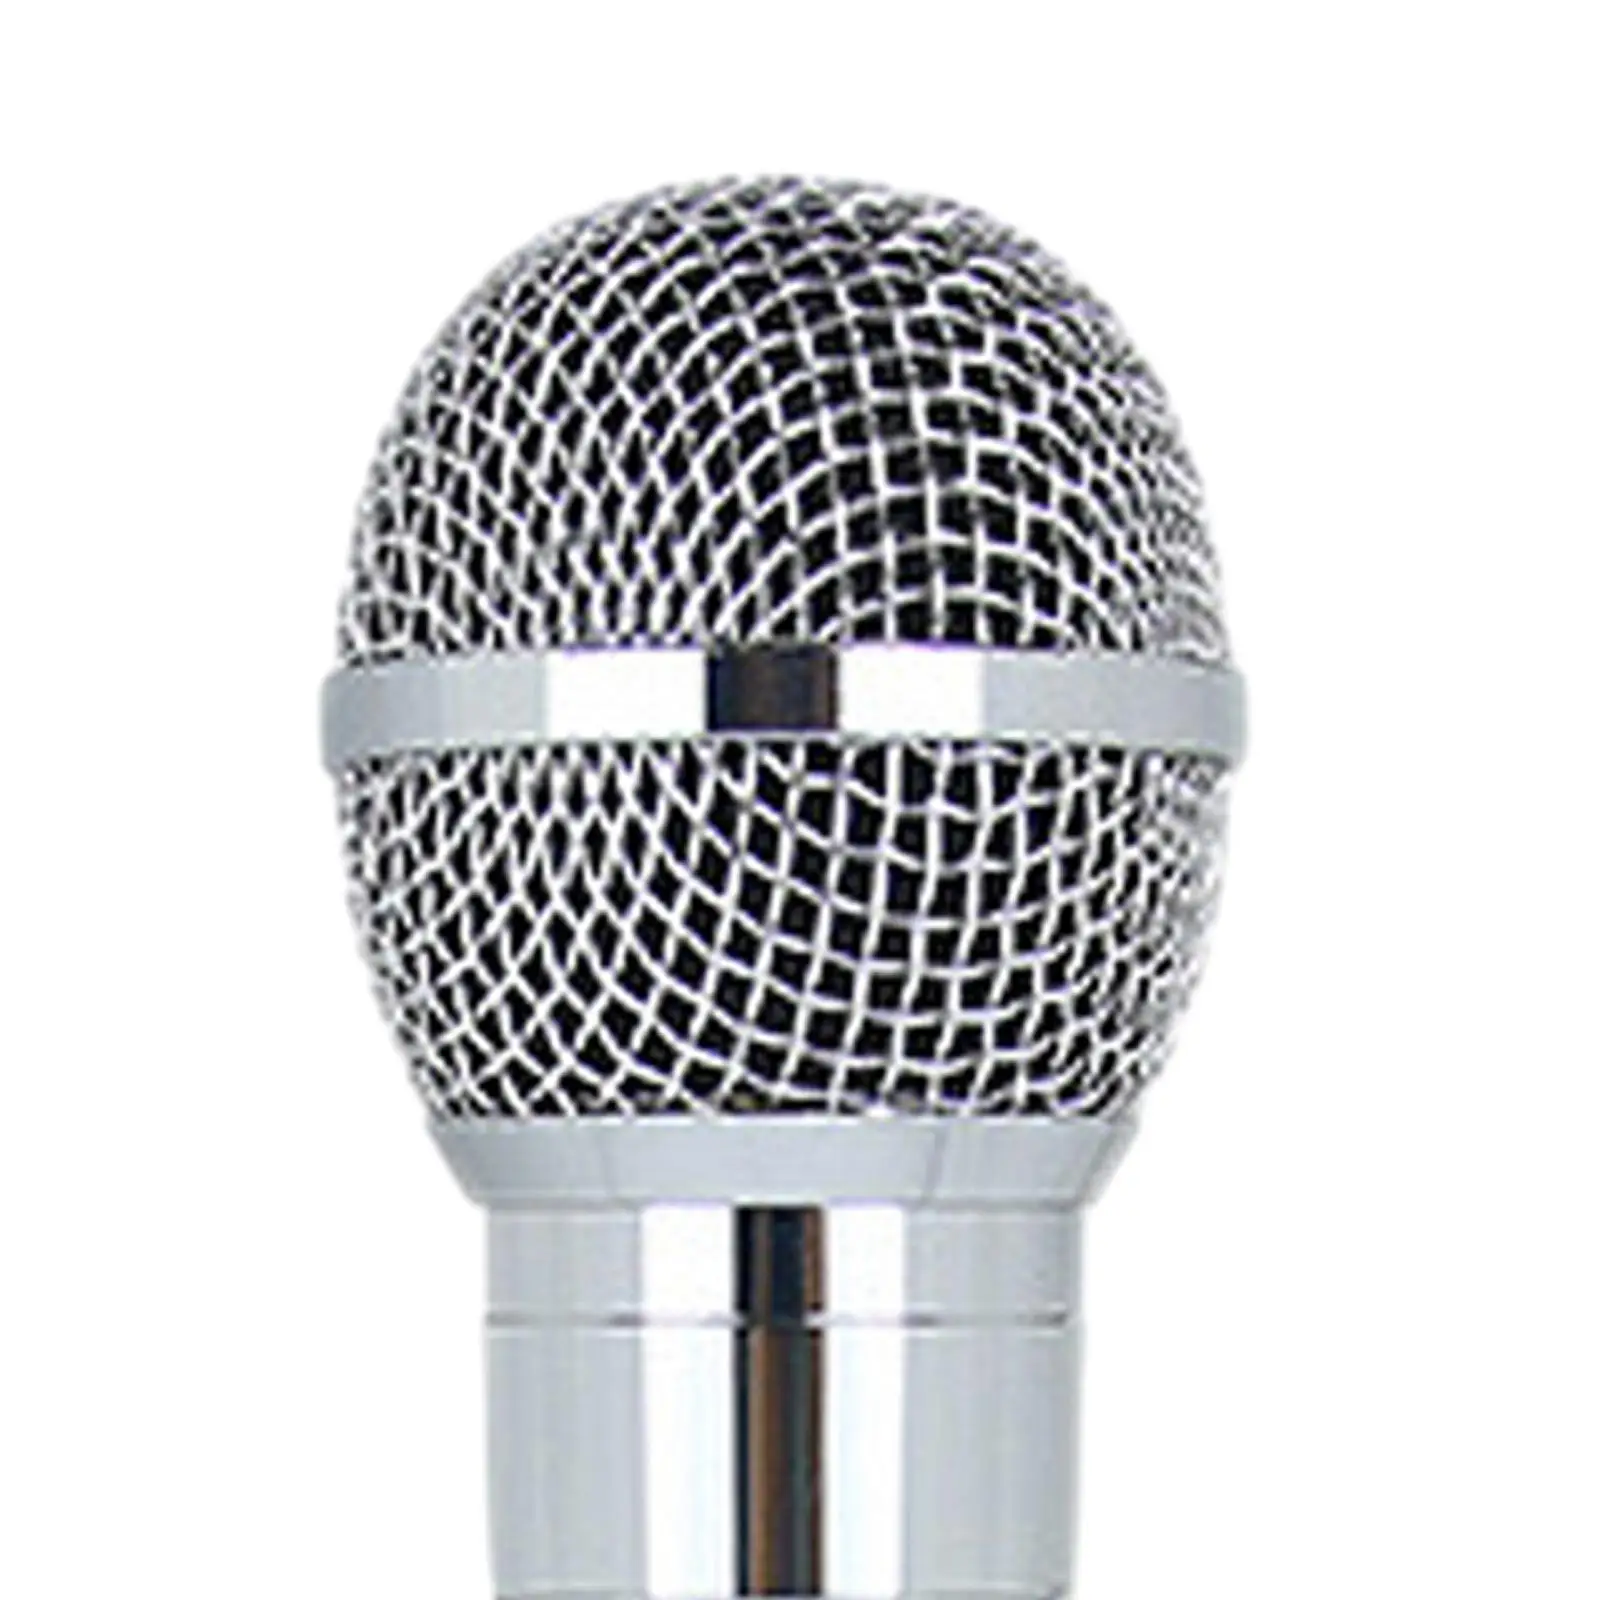 Karaoke Microphone High Performance Premium Dynamic Vocal Microphone Handheld Microphone for Party Home Mixer Performance Show